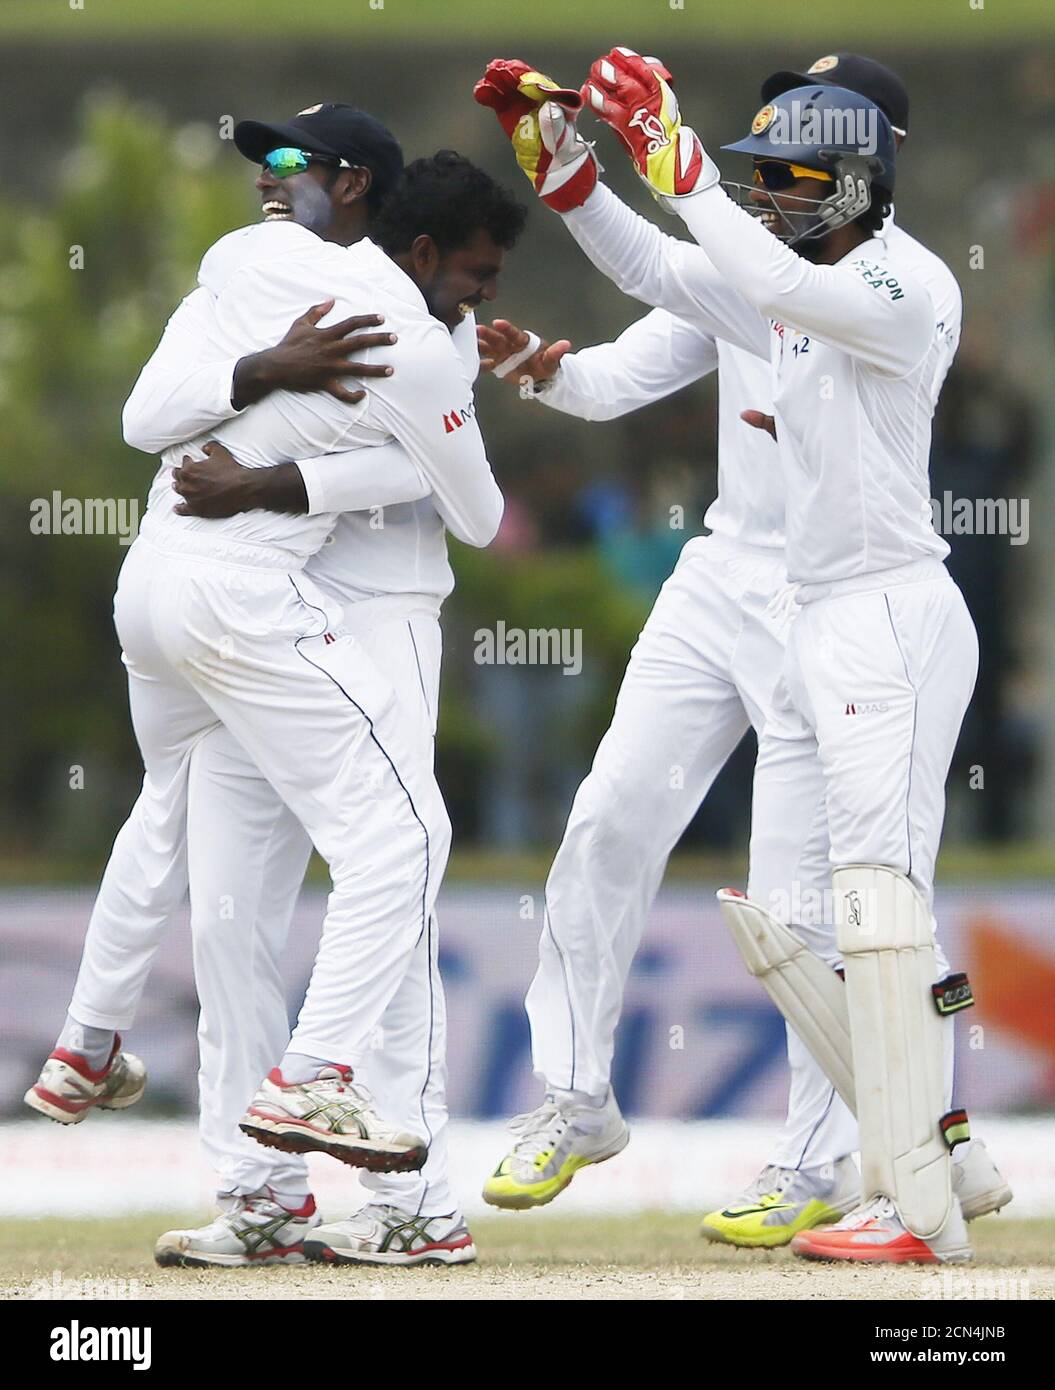 Sri Lanka's Tharindu Kaushal (L) celebrates with captain Angelo Mathews (2nd L) and Dinesh Chandimal (R) after taking the wicket of India's Shikhar Dhawani (not pictured) during the fourth day of their first test cricket match against Sri Lanka in Galle August 15, 2015. REUTERS/Dinuka Liyanawatte Stock Photo